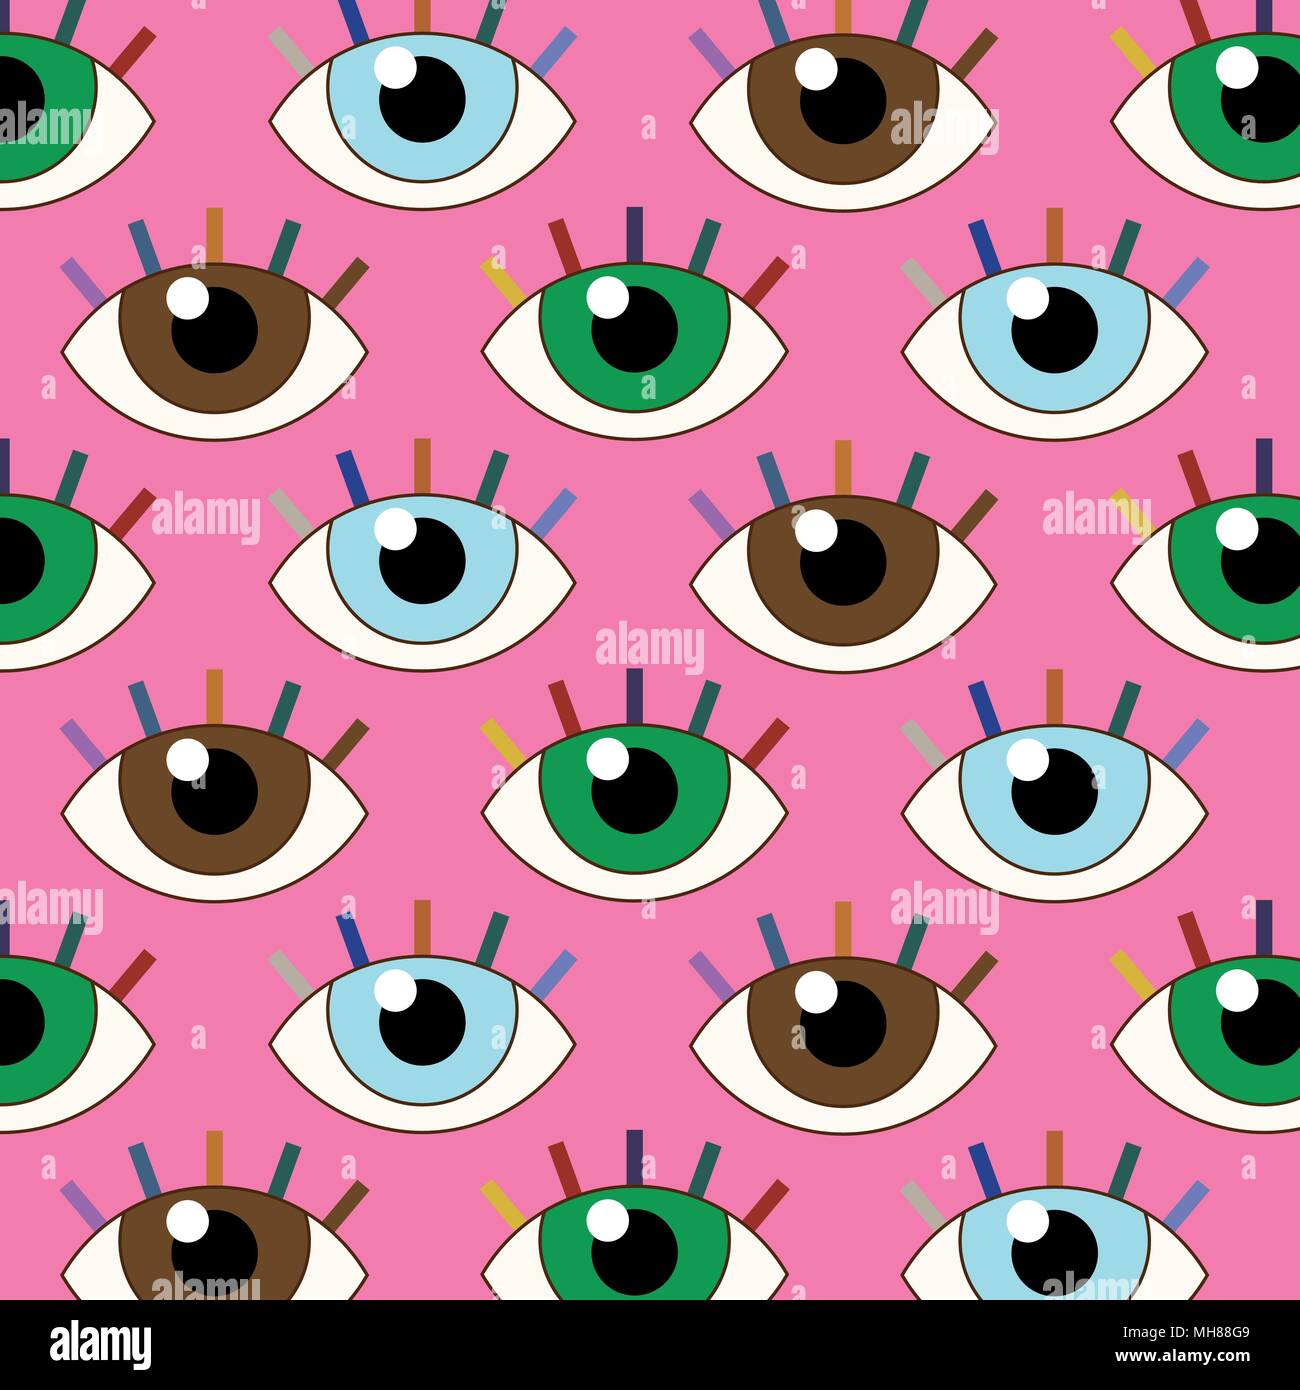 Funny vector illustration of seamless eyes with fixed gaze. Stock Vector